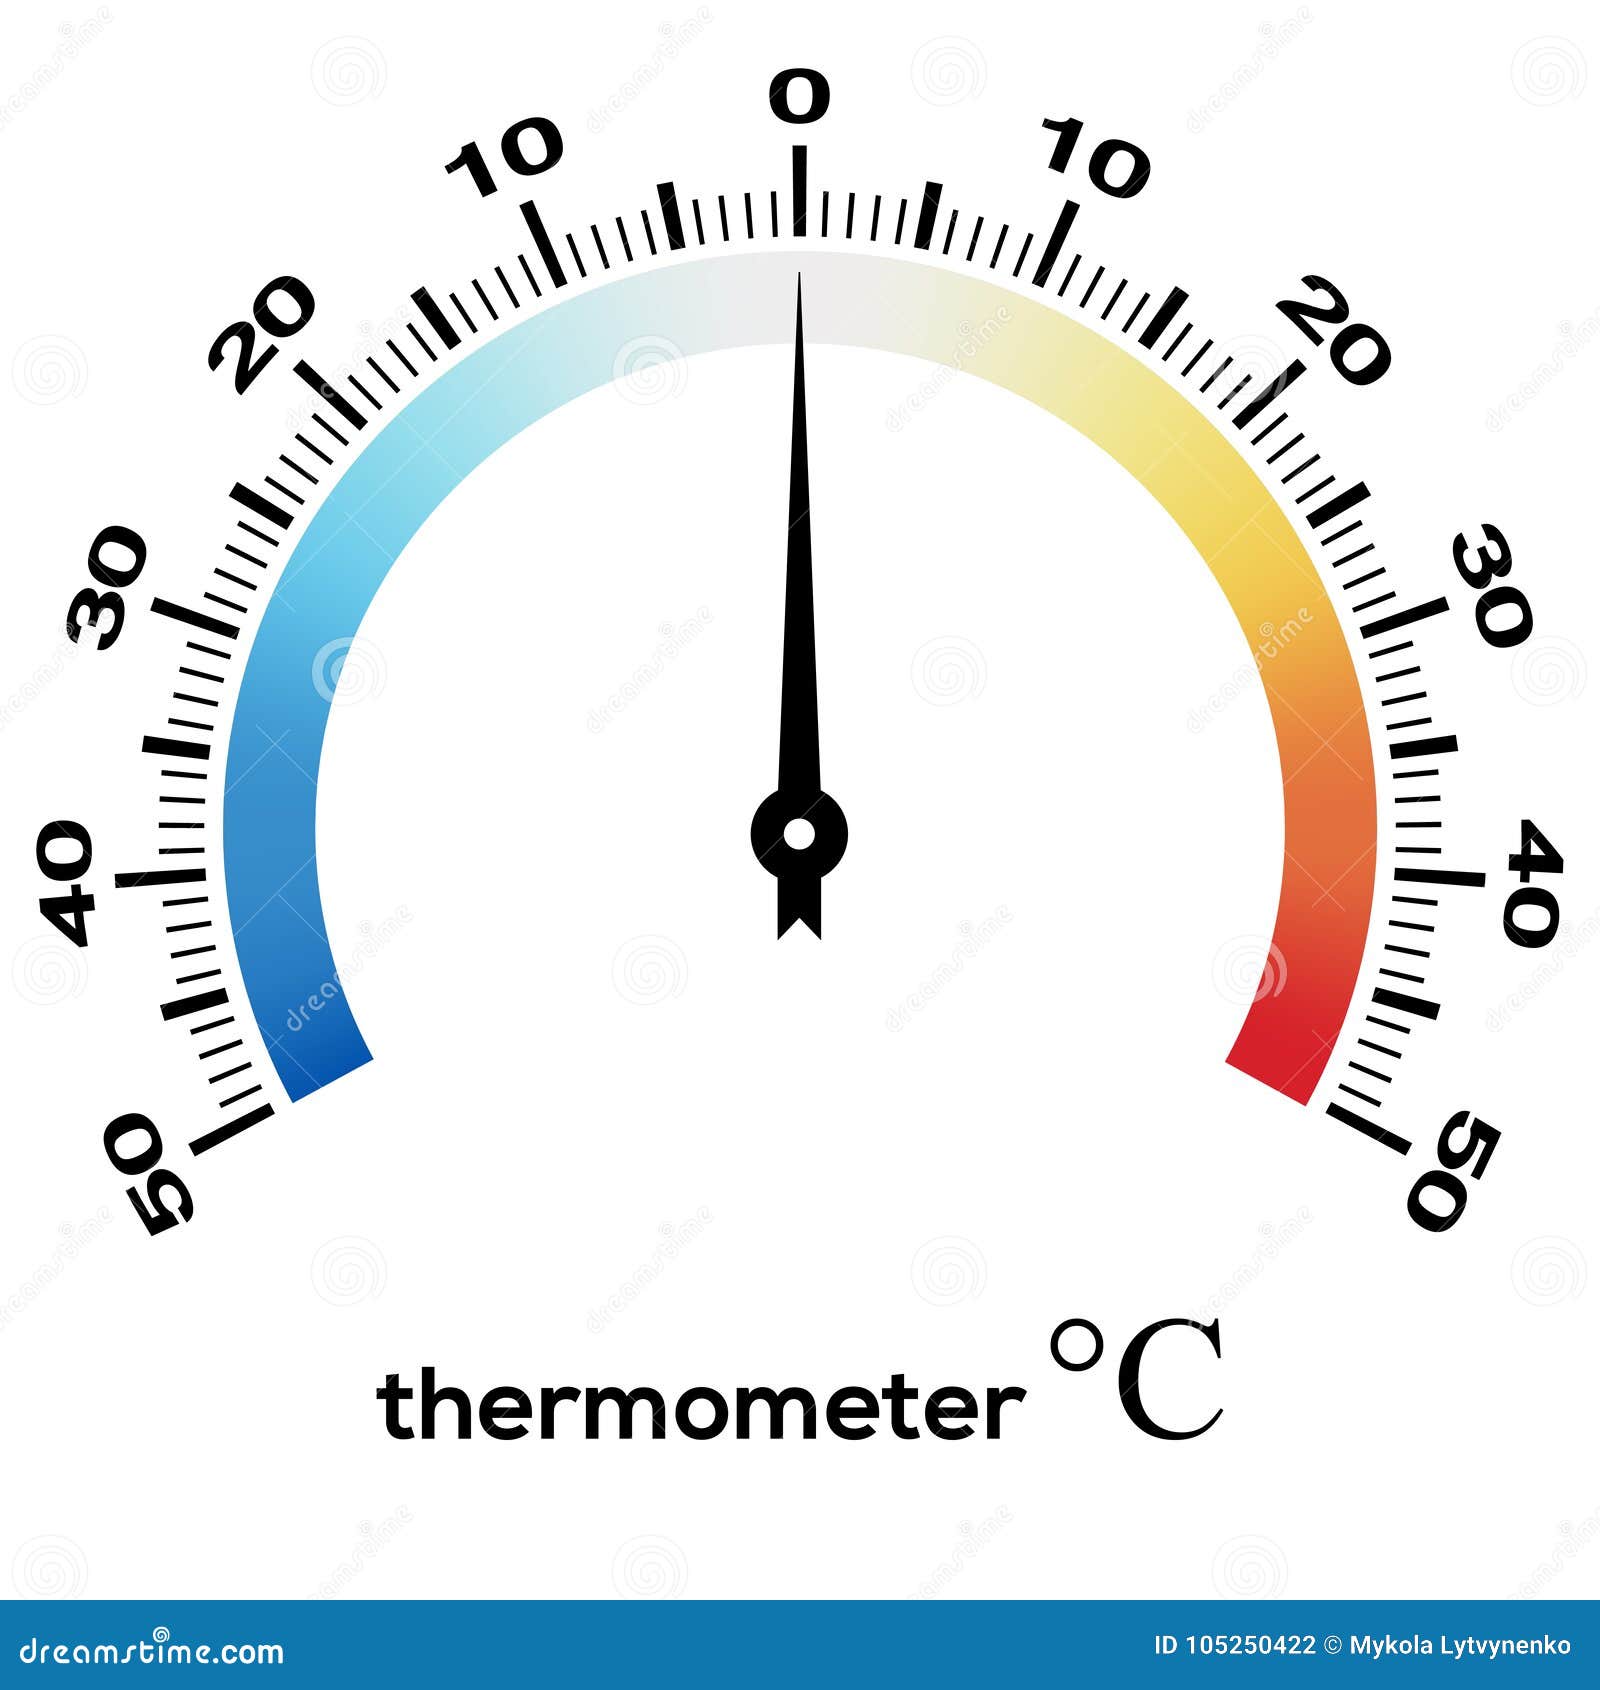 https://thumbs.dreamstime.com/z/circular-thermometer-digital-analog-color-bar-vector-measuring-temperature-degrees-celsius-thermometer-white-105250422.jpg